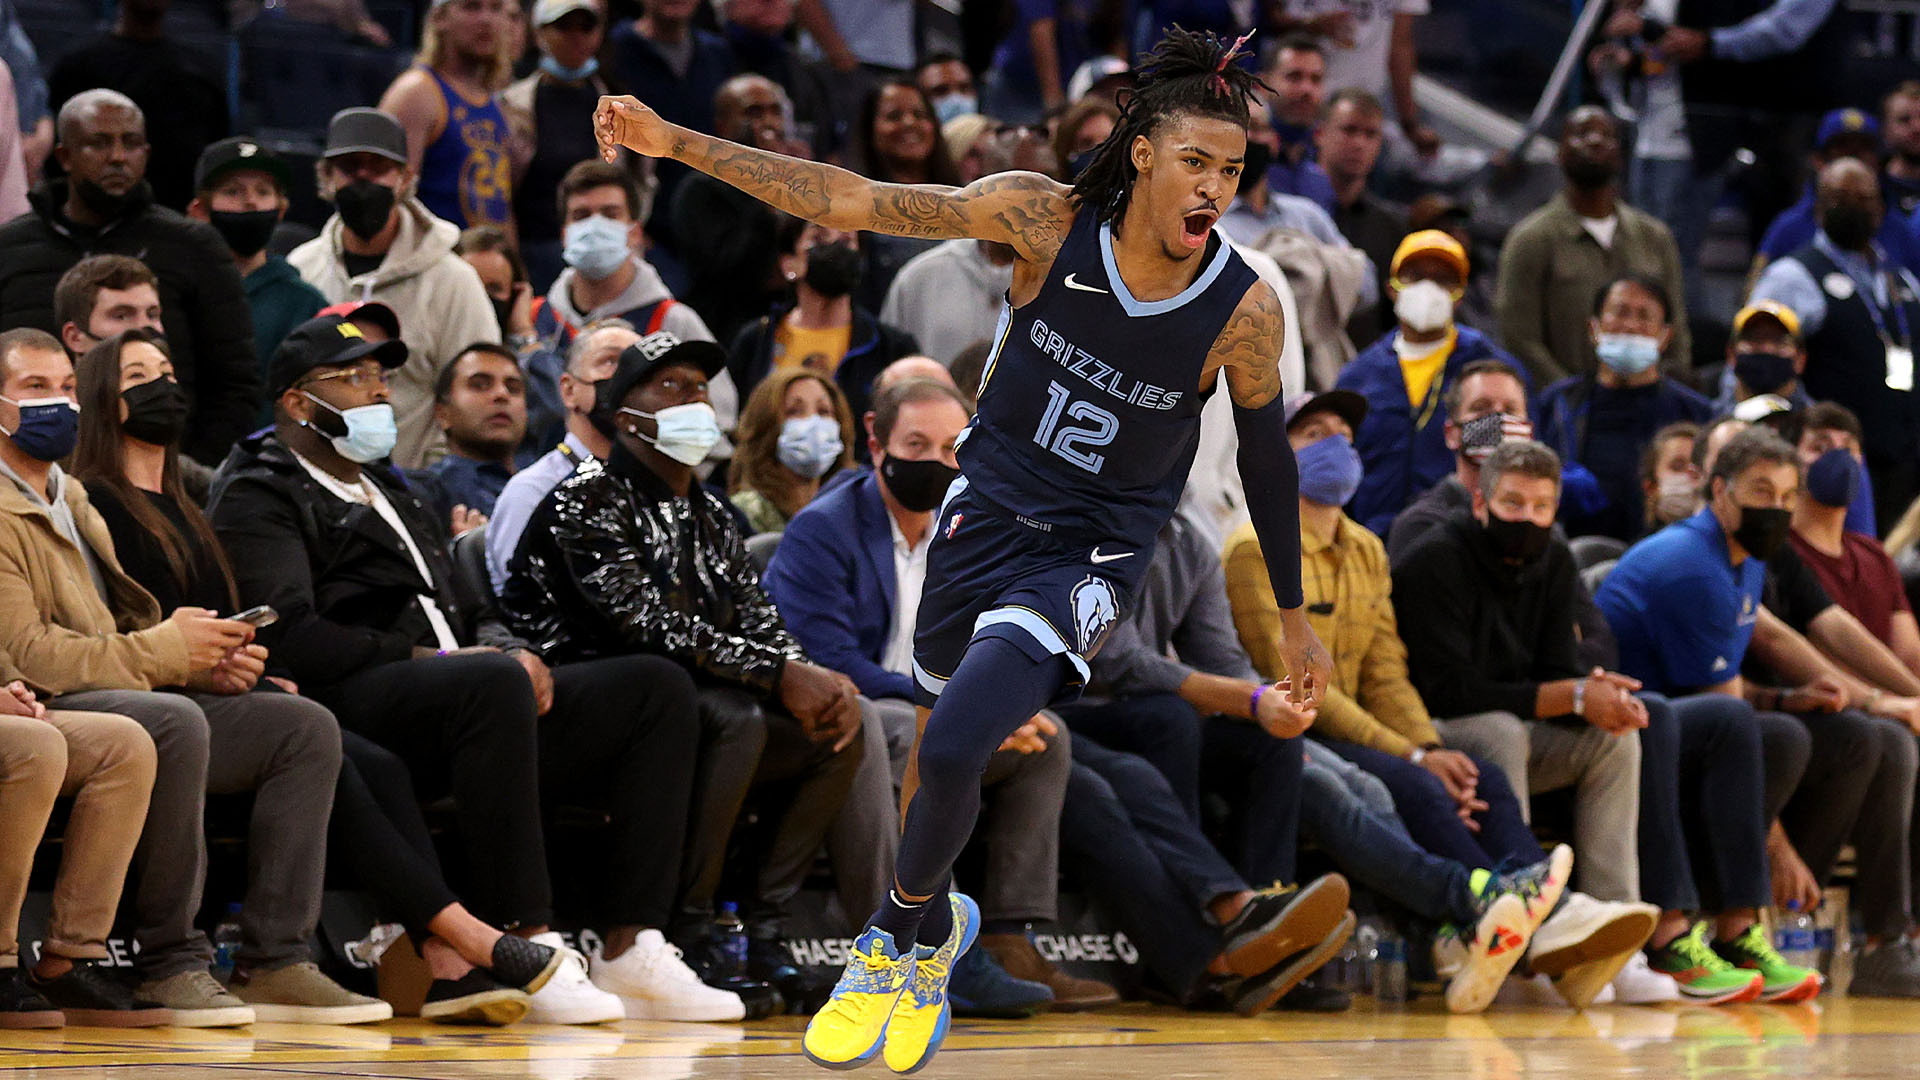 NBA: Grizzlies welcome back Ja Morant by edging Rockets